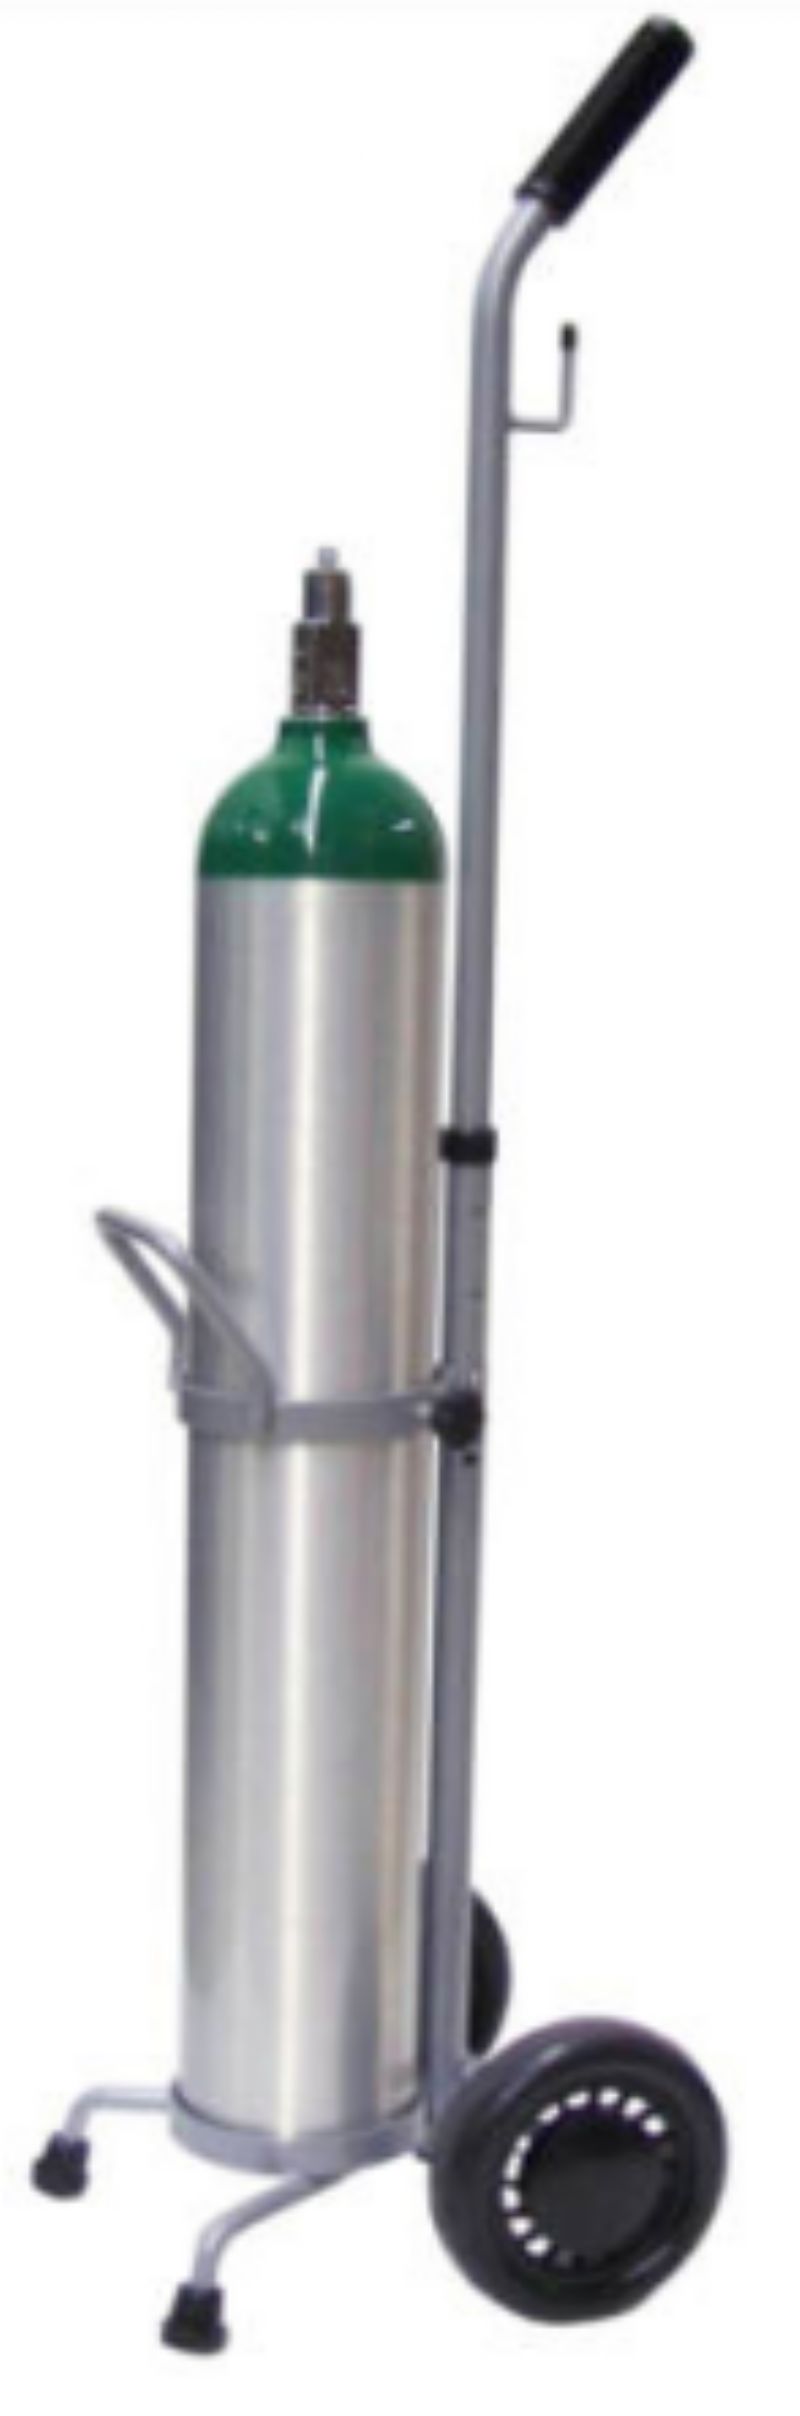 Standard Oxygen Cylinder Carts by Responsive Respiratory Picture